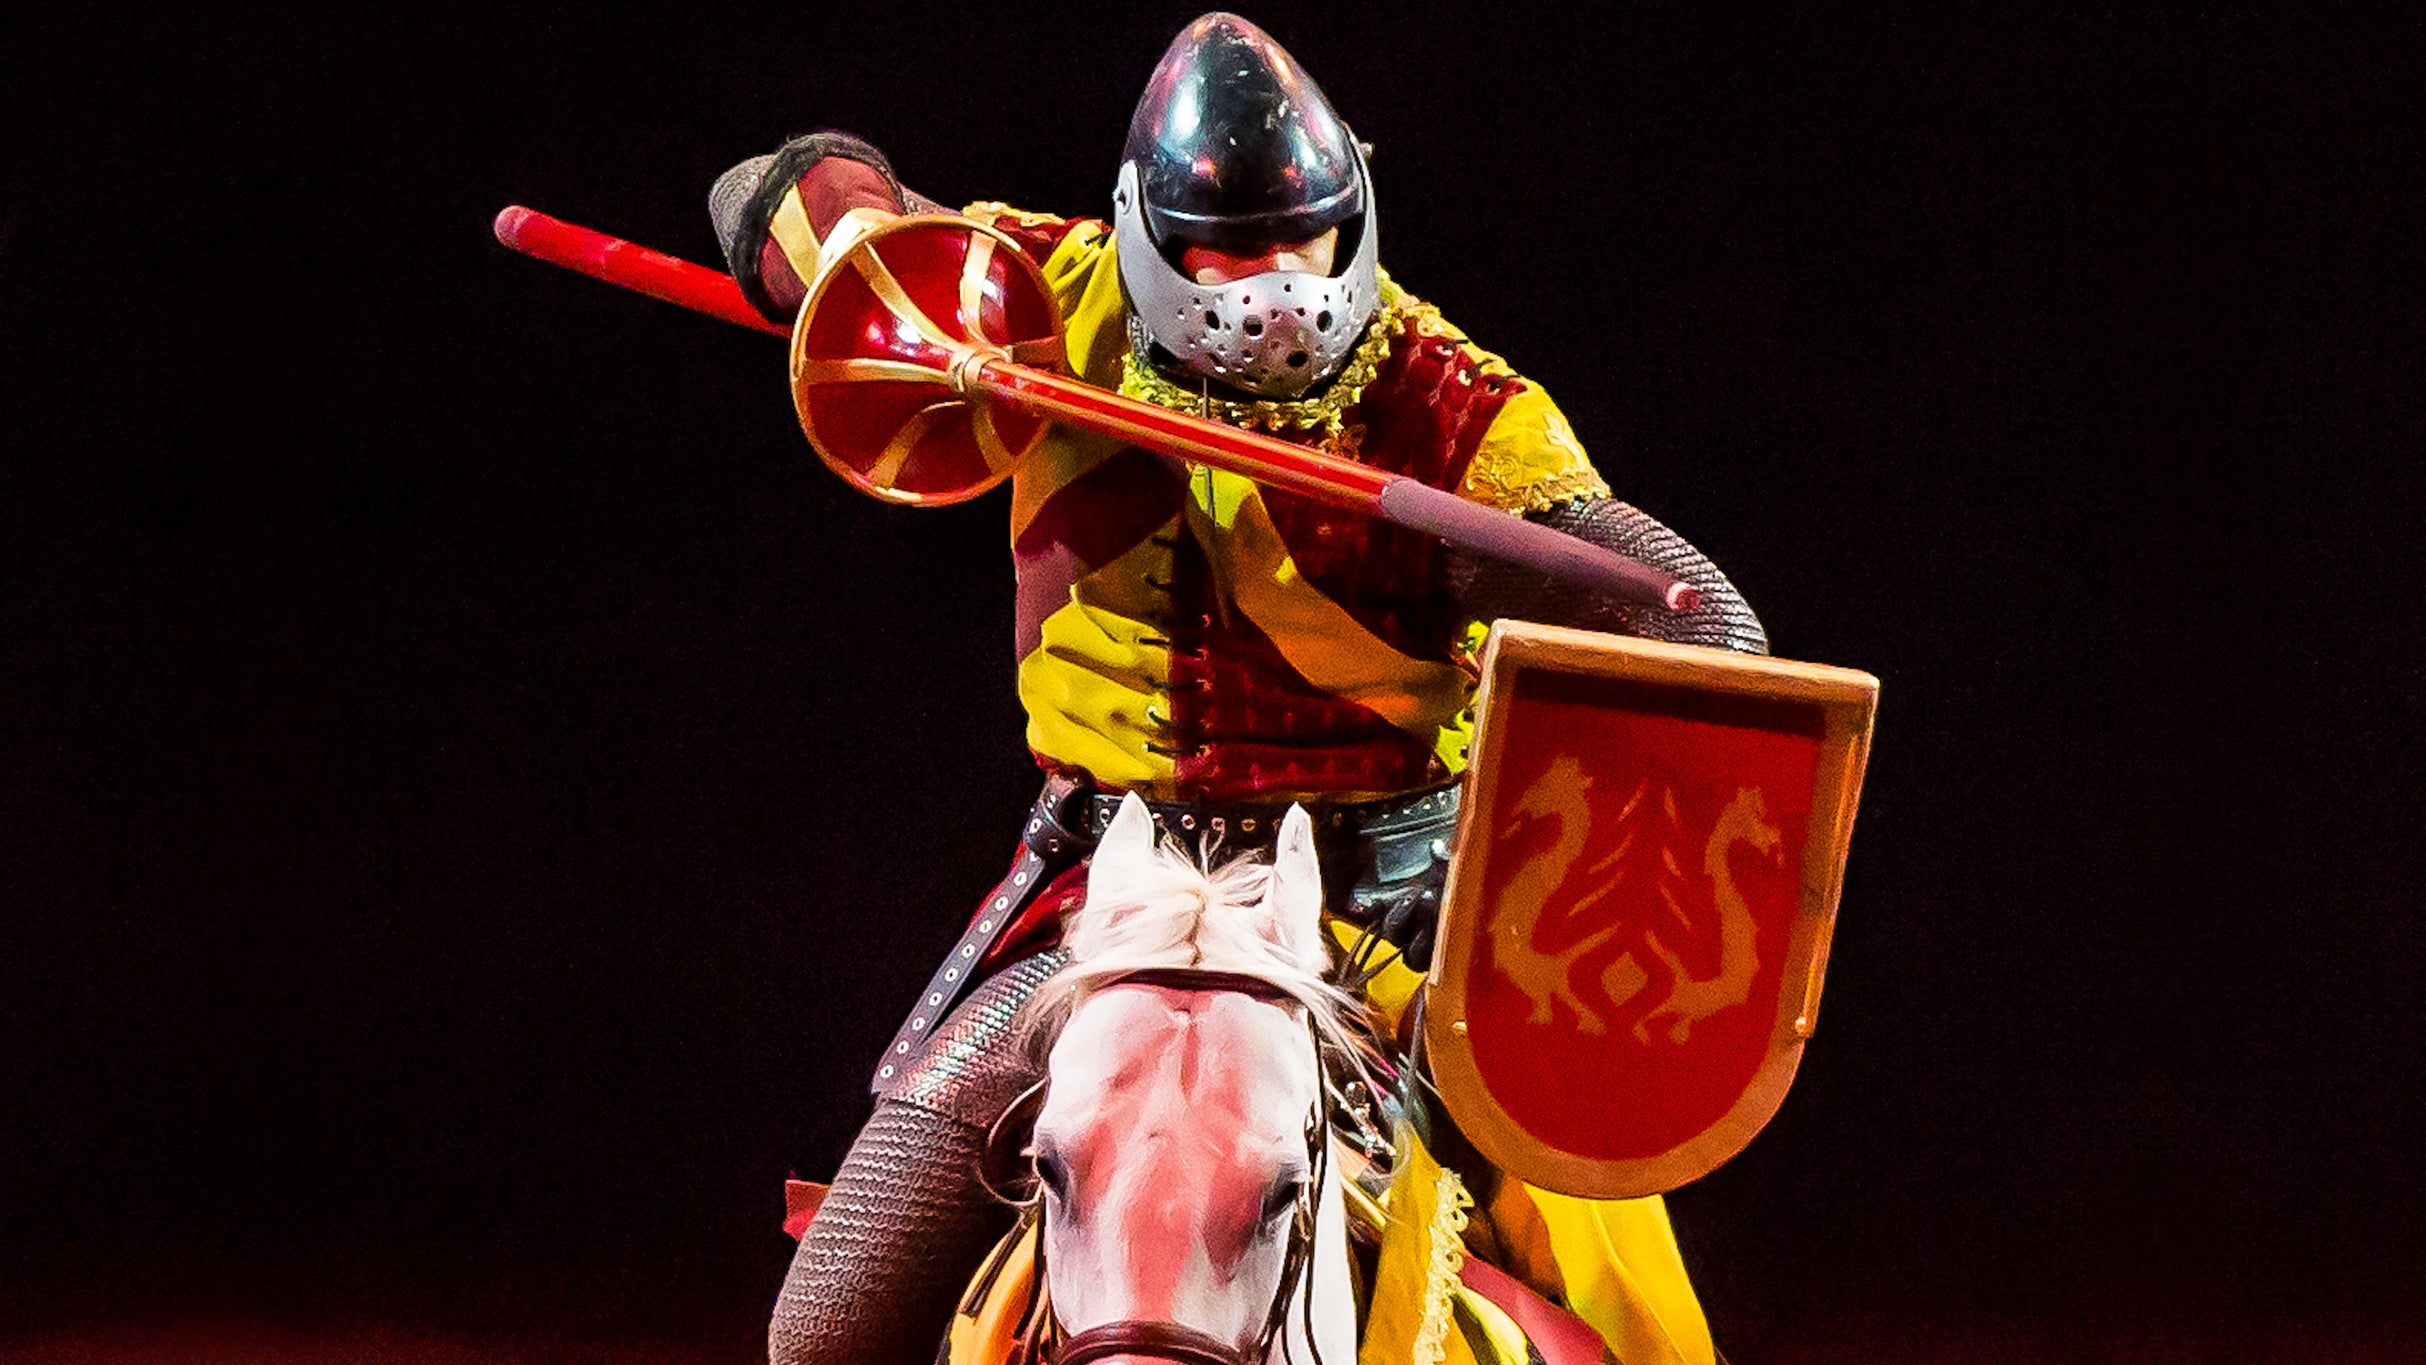 Tournament of Kings at Excalibur Hotel and Casino – Las Vegas, NV